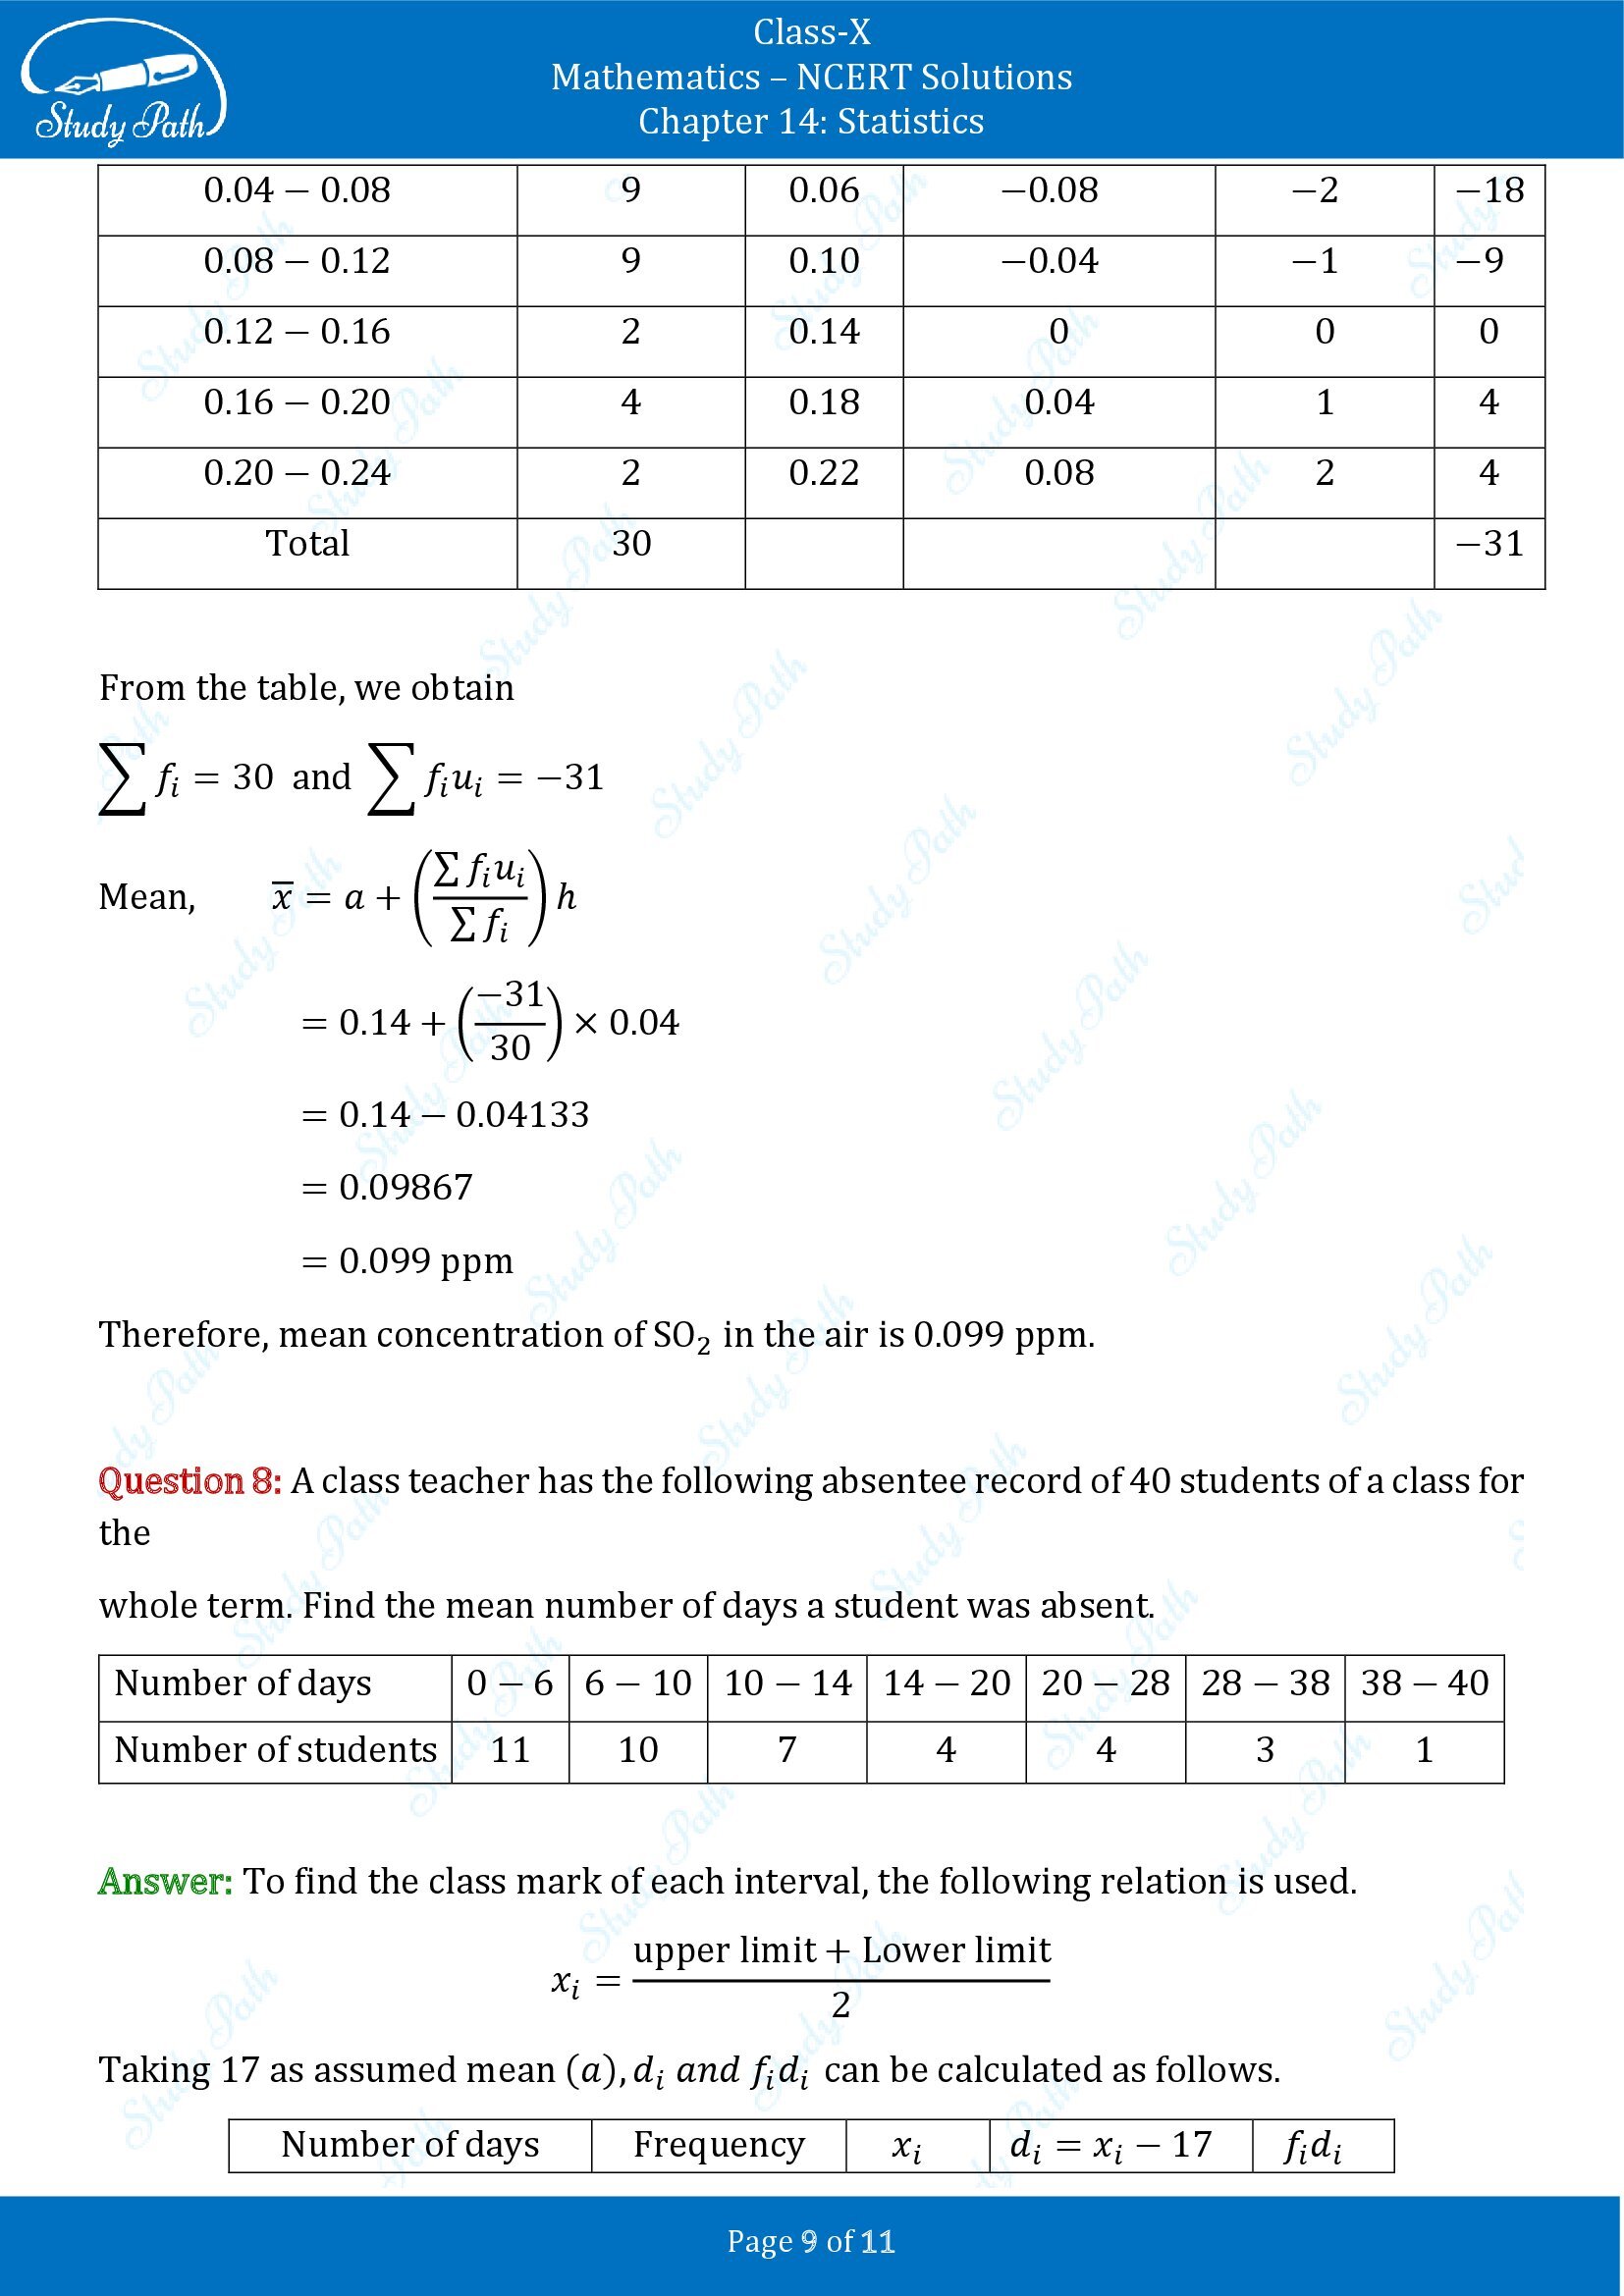 NCERT Solutions for Class 10 Maths Chapter 14 Statistics Exercise 14.1 00009